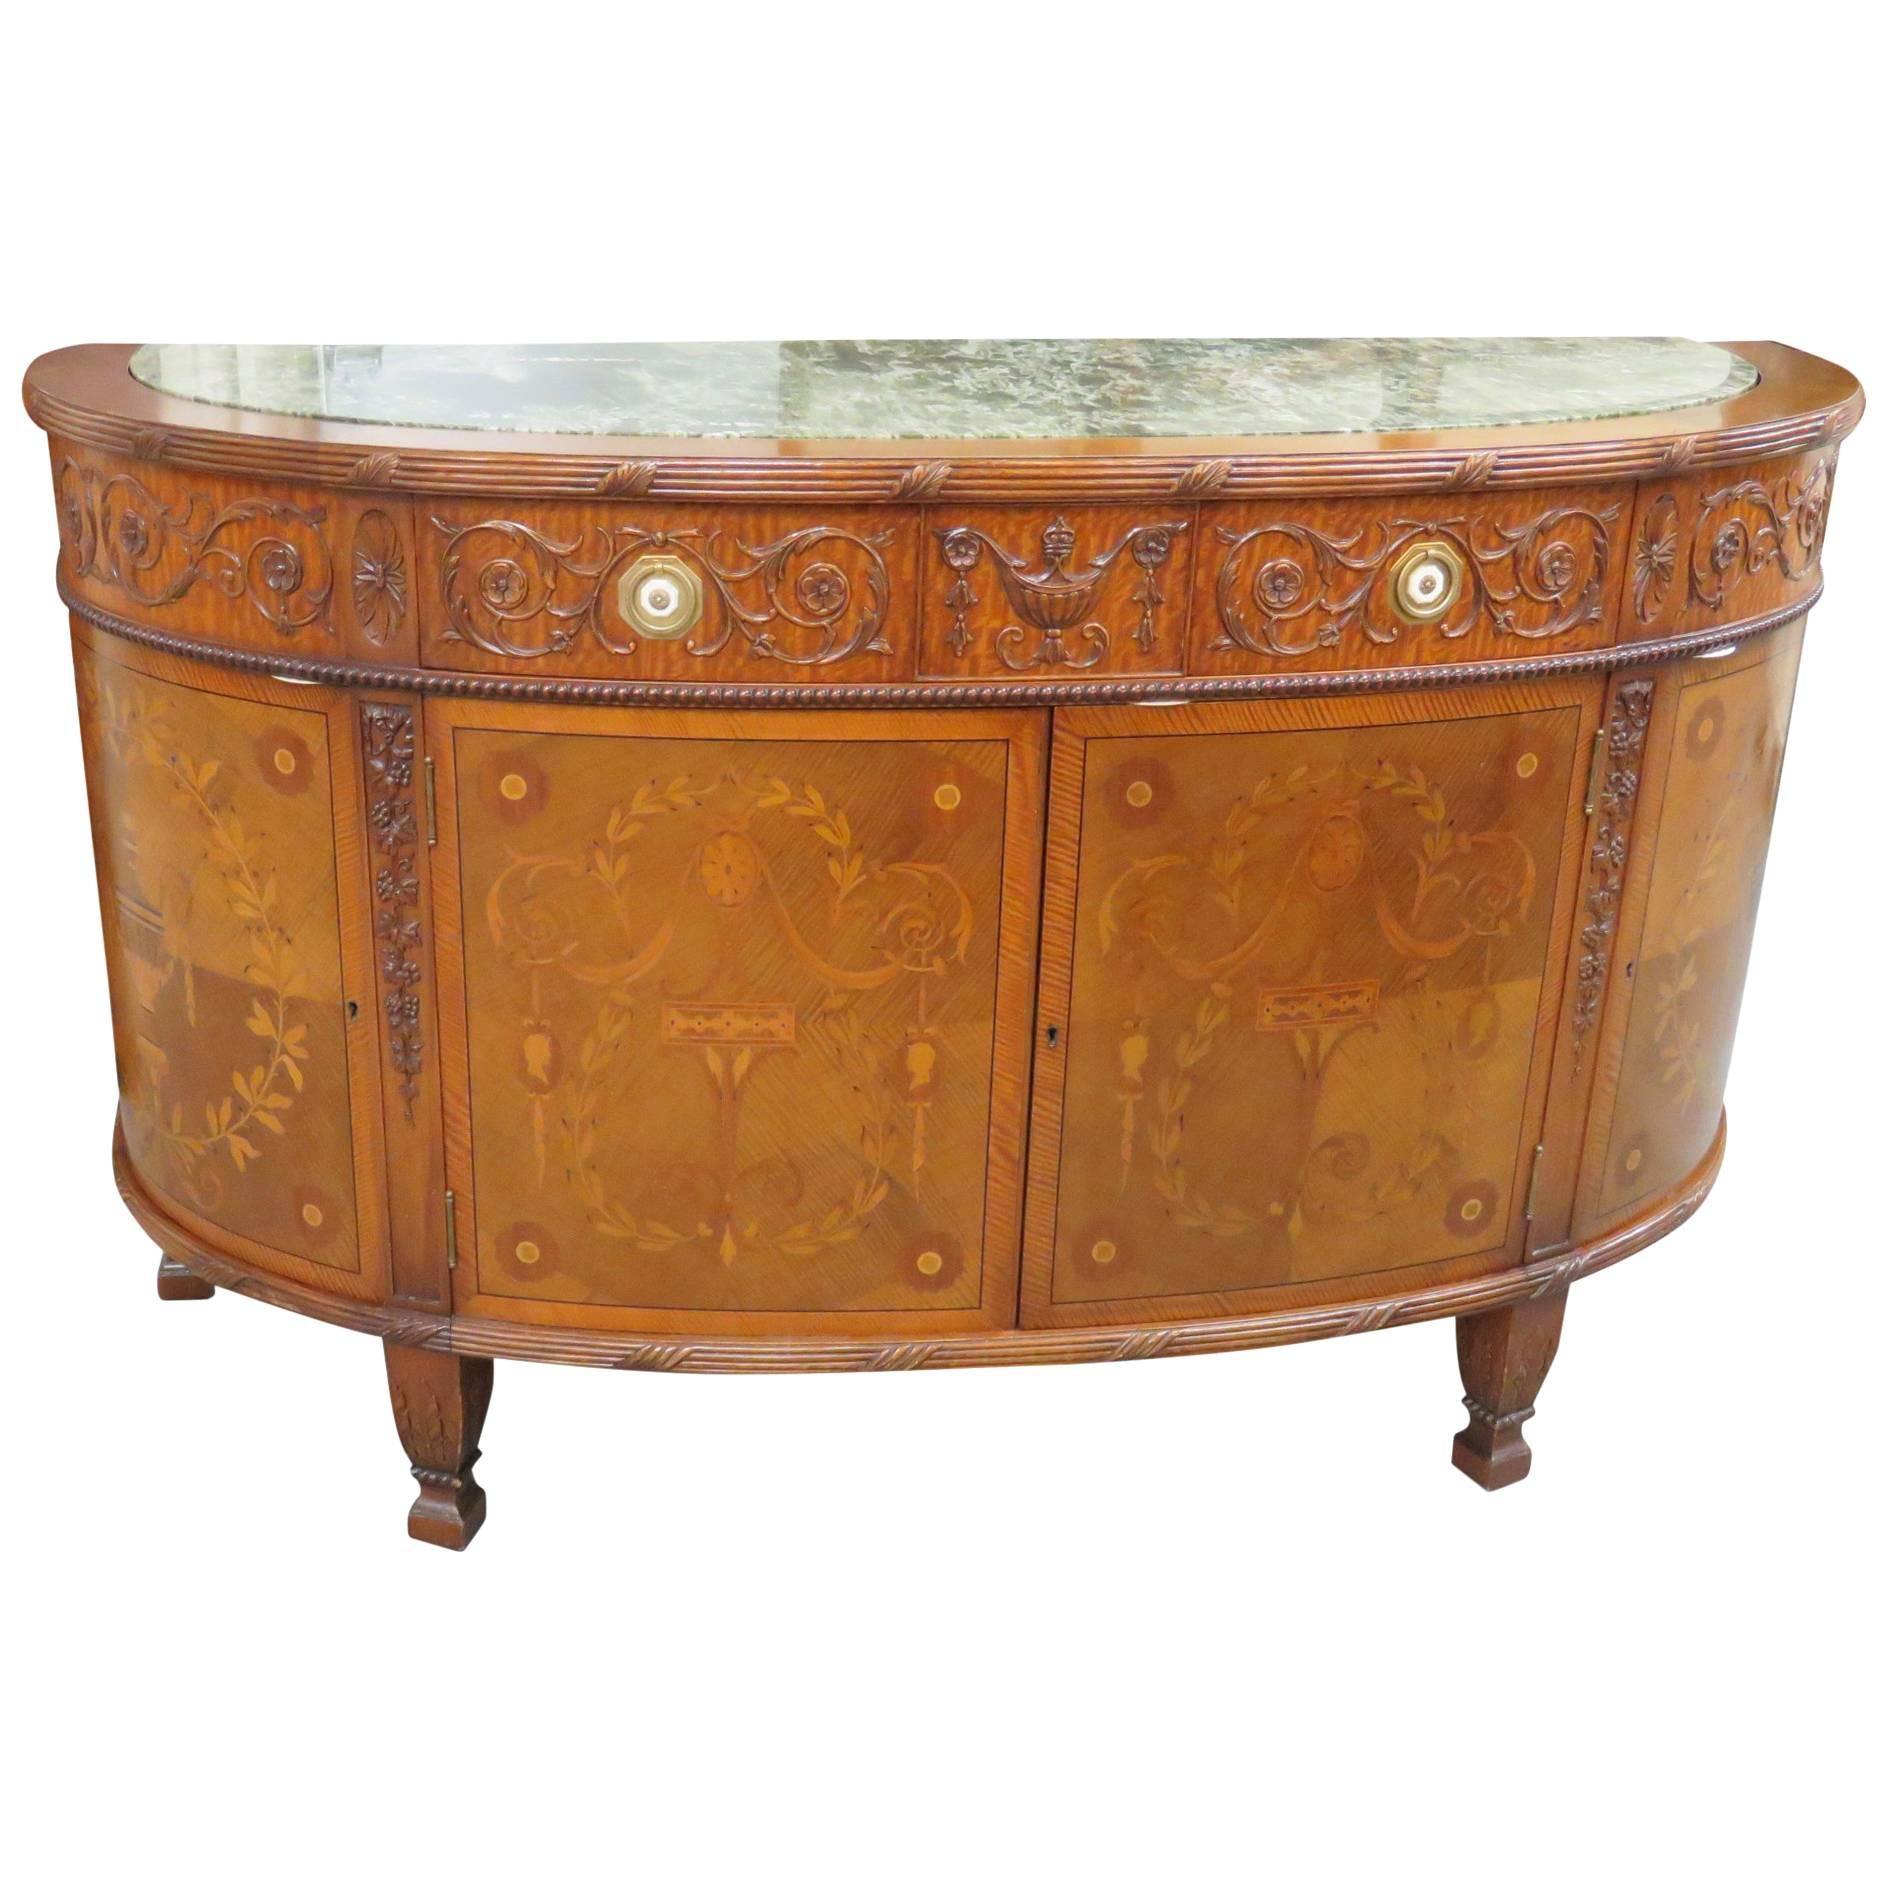 Irwin Marble-Top Inlaid Commode